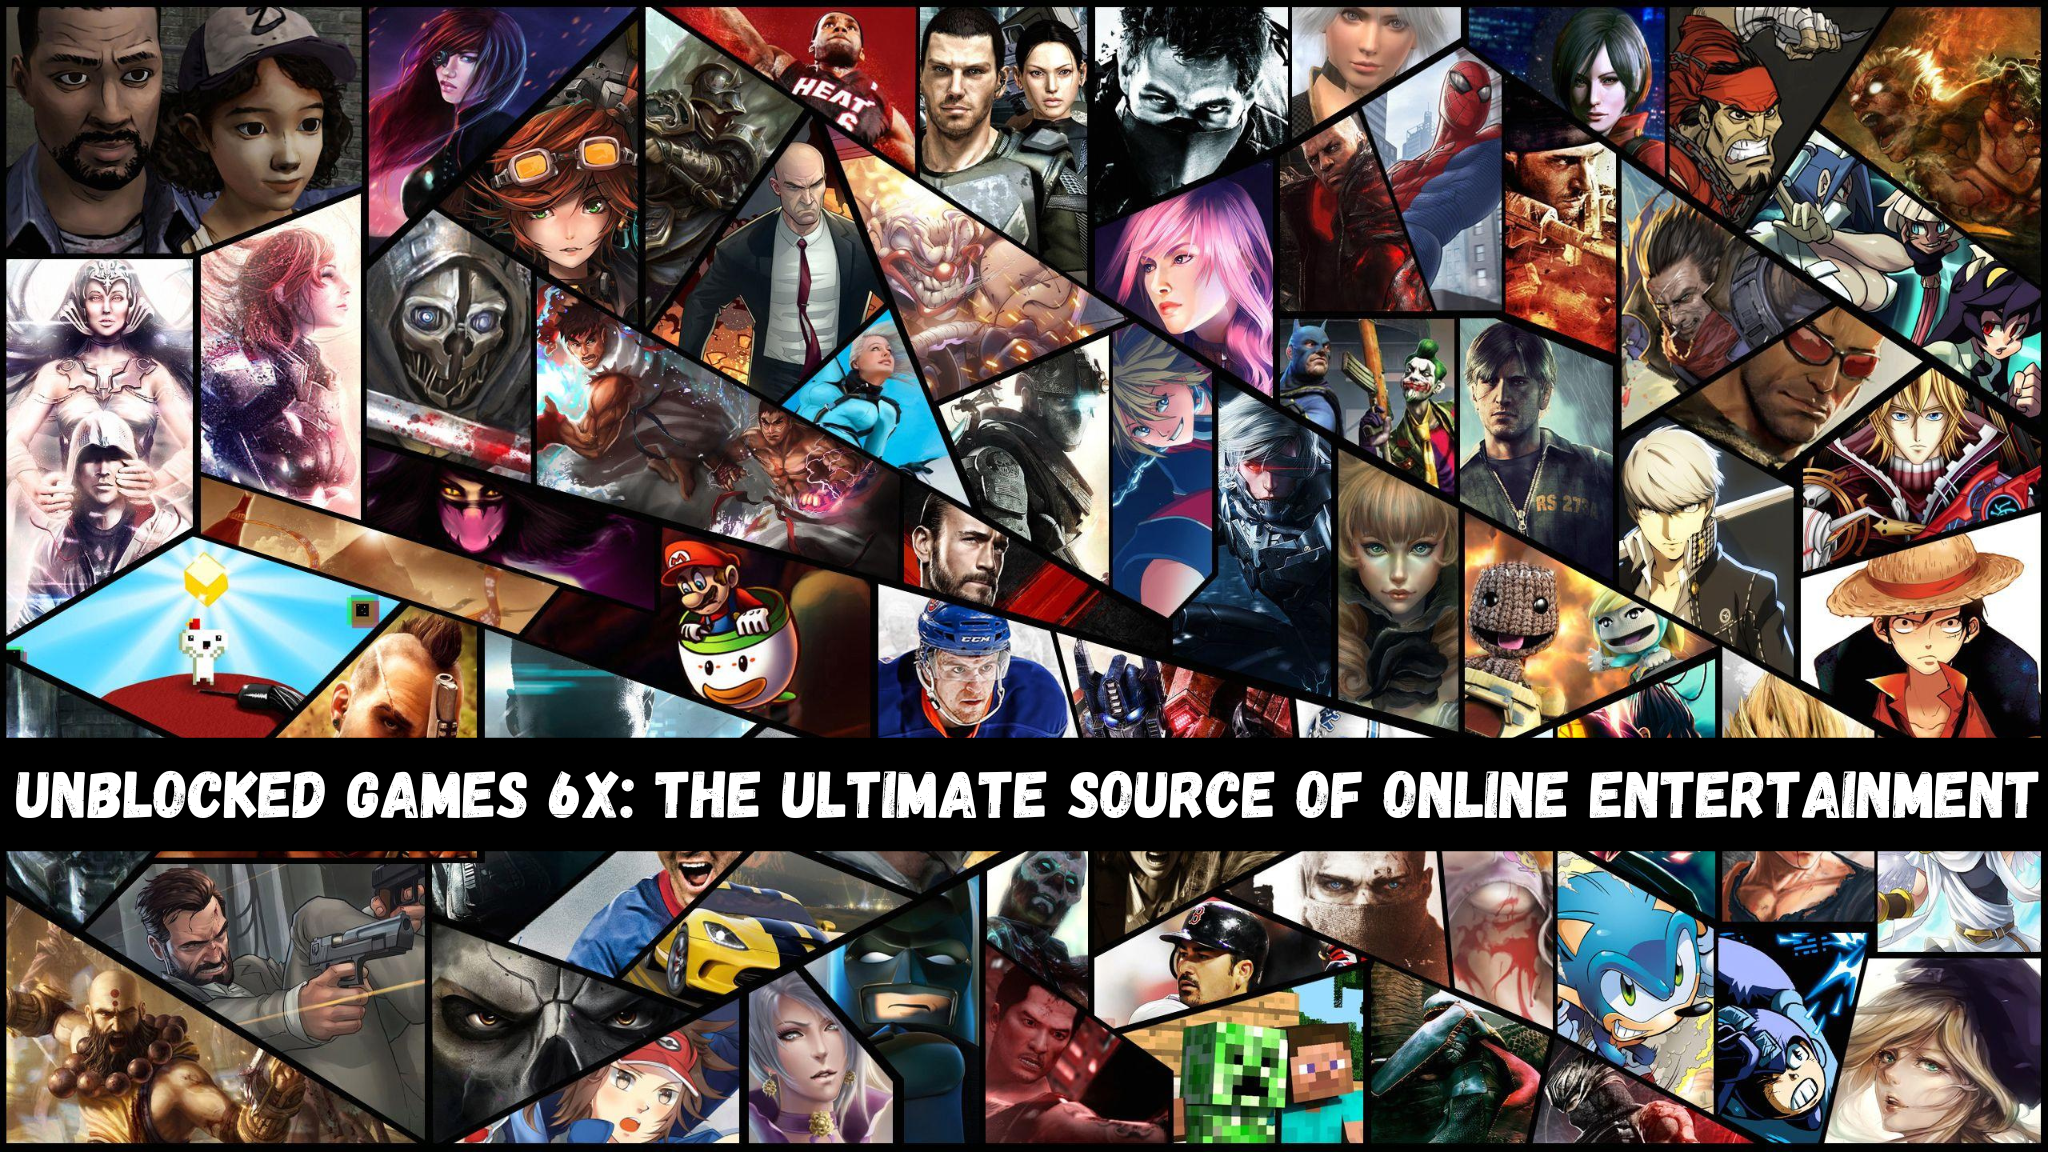 Unblocked Games 6x: The Ultimate Source of Online Entertainment